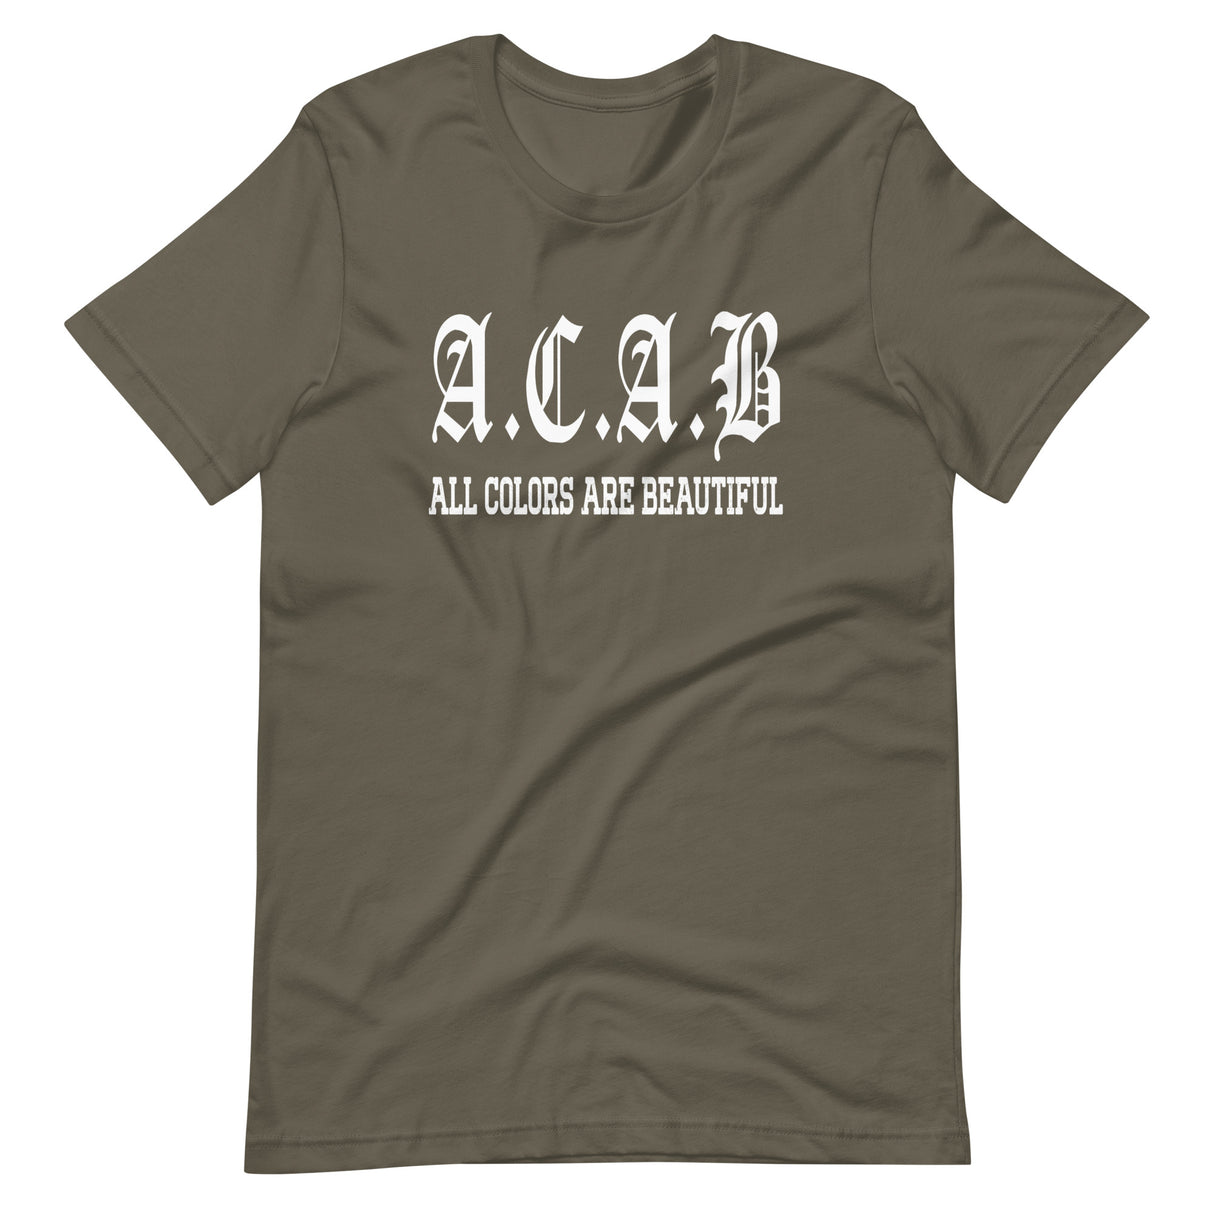 ACAB All Colors Are Beautiful Shirt